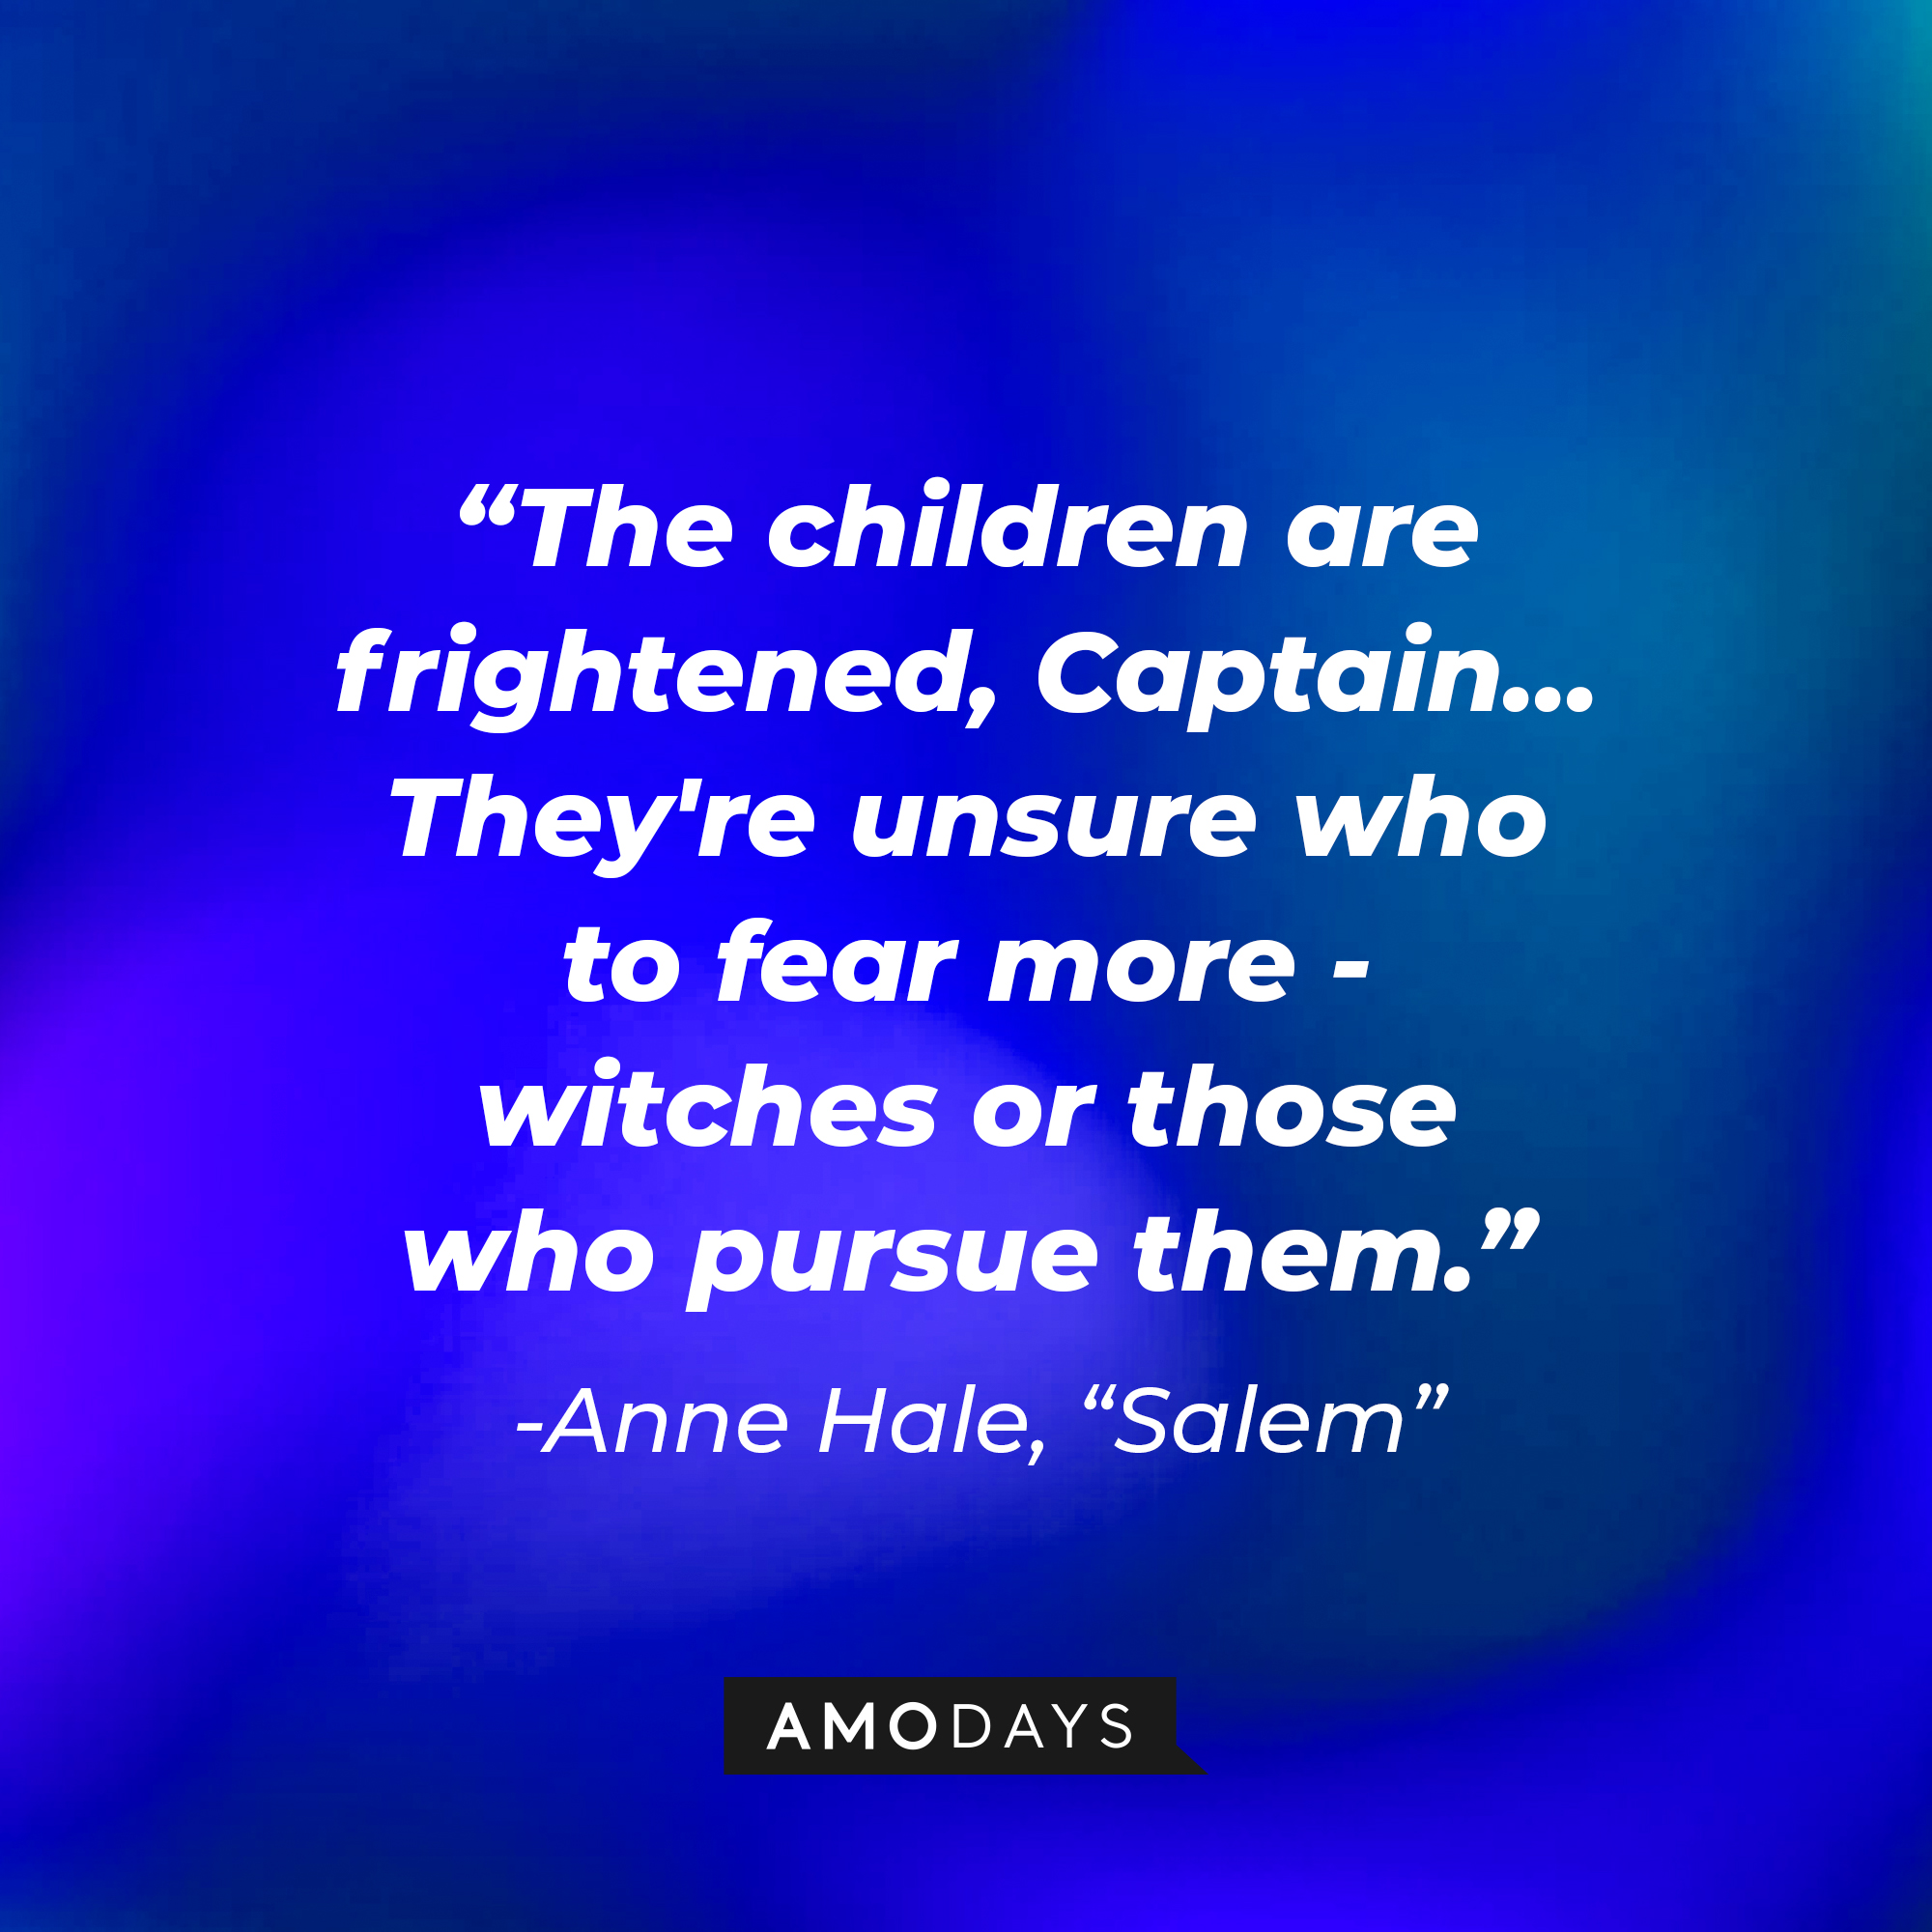 Anne Hale's quote: "The children are frightened, Captain… They're unsure who to fear more - witches or those who pursue them." | Source: Amodays